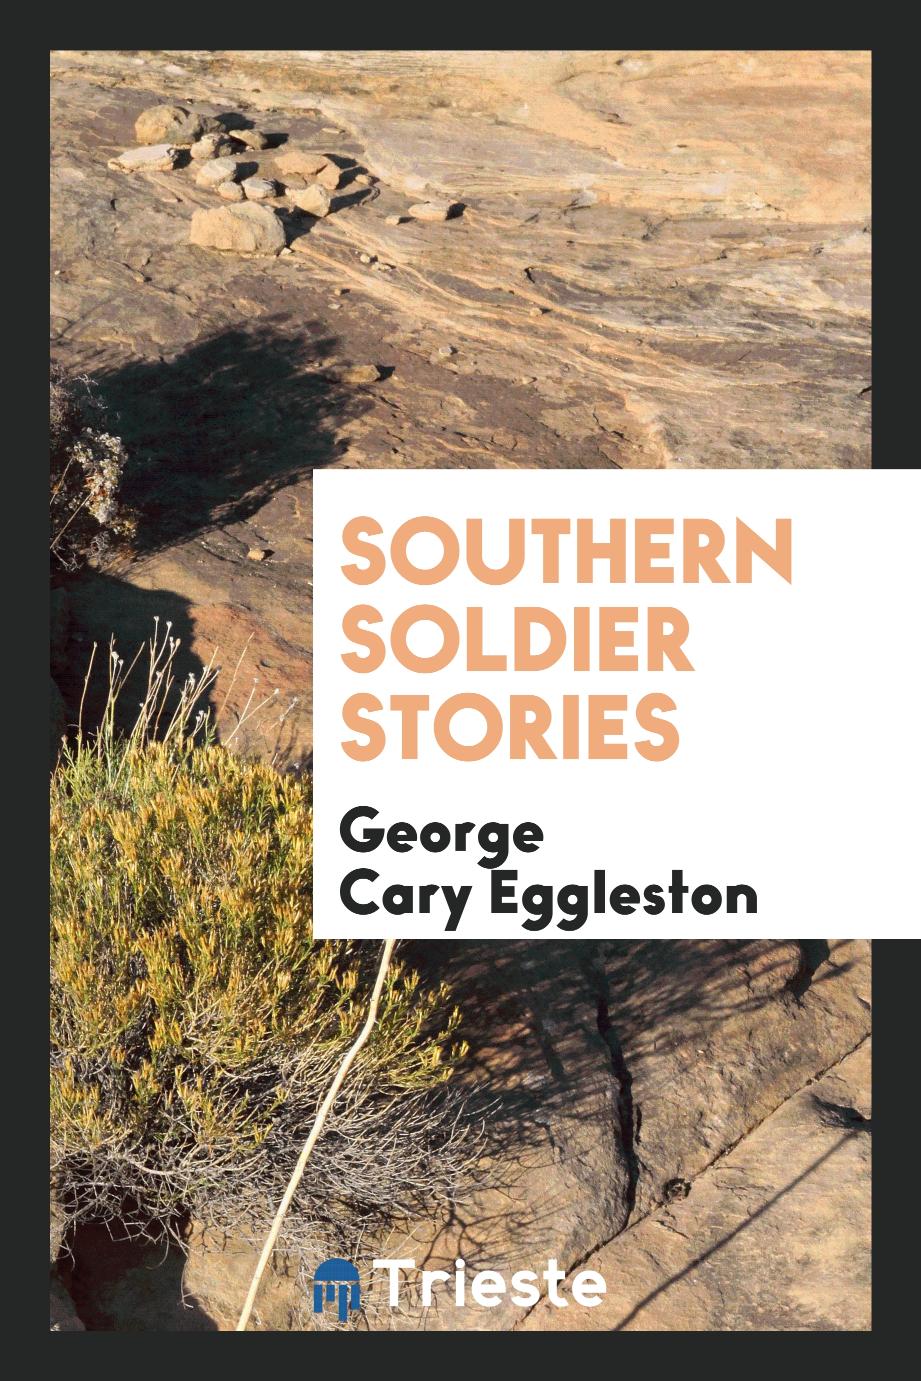 Southern soldier stories